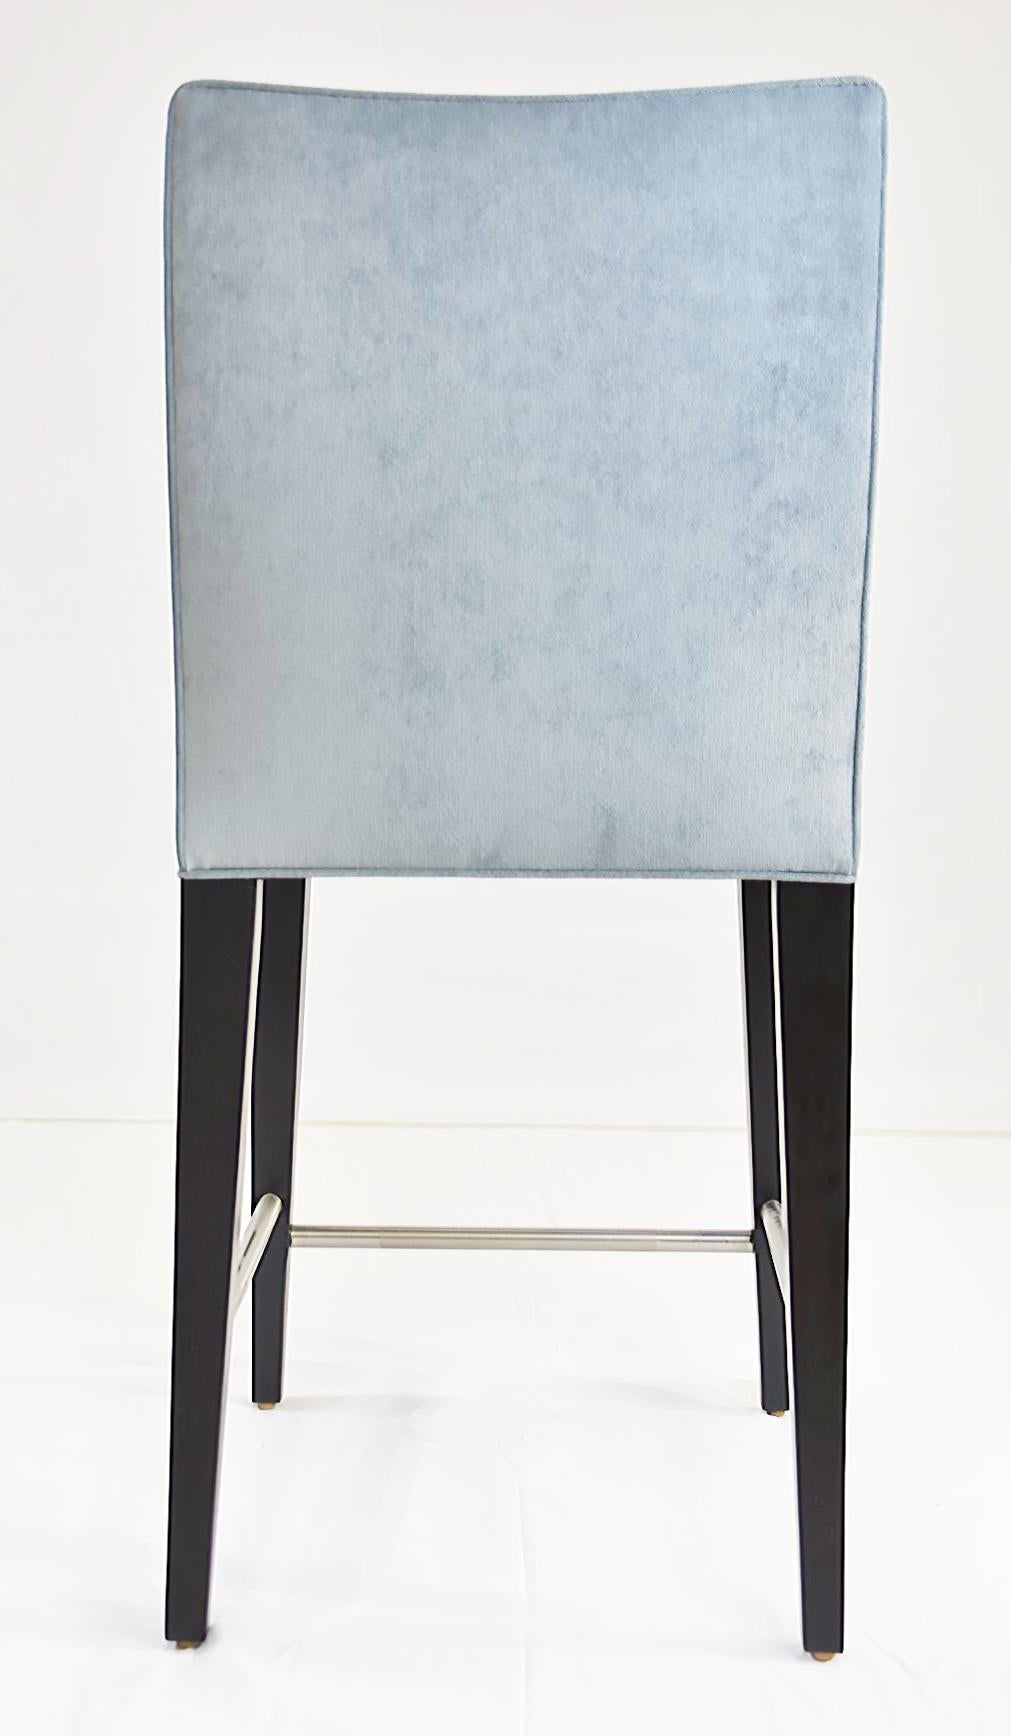 Le Jeune Upholstery Cutler Counter Stool Floor Model with Metal Footrest In Good Condition For Sale In Miami, FL